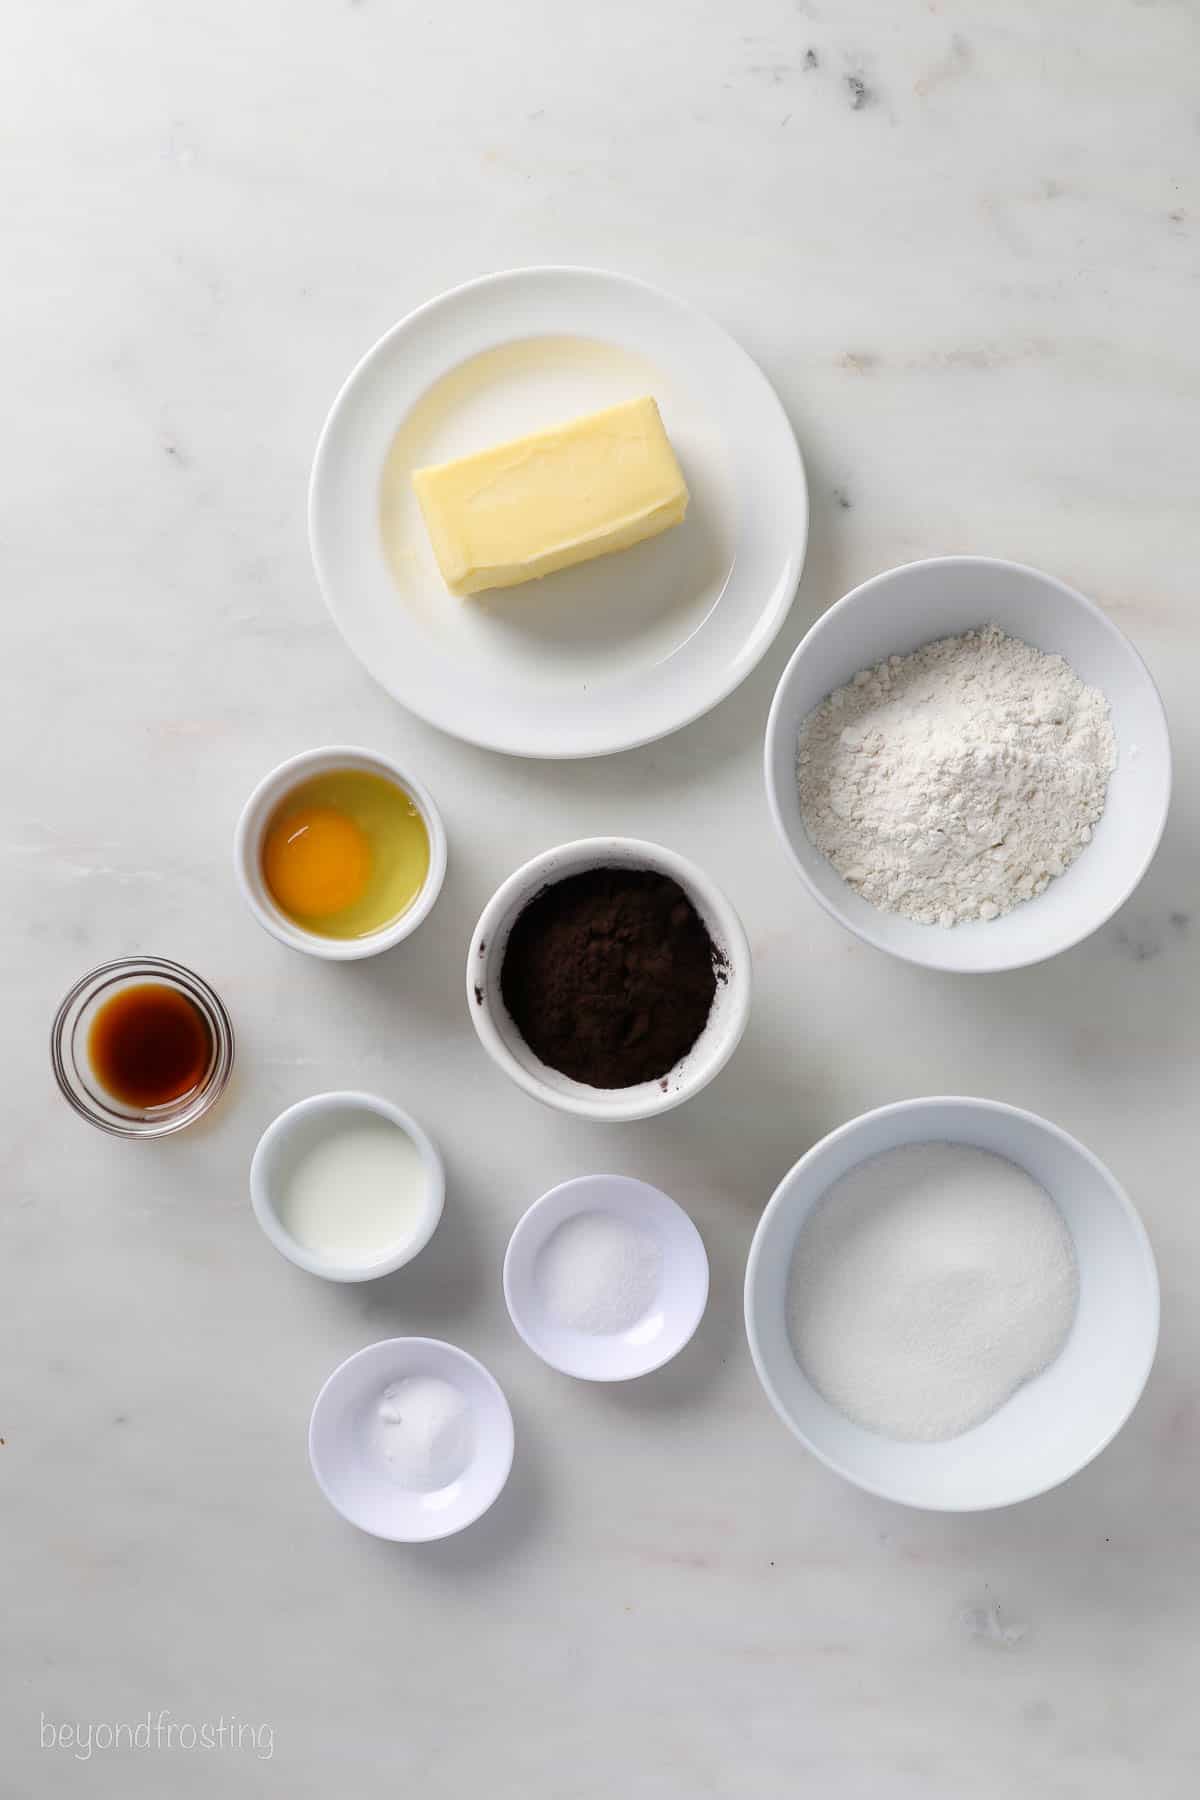 The ingredients for chocolate cutout sugar cookies.